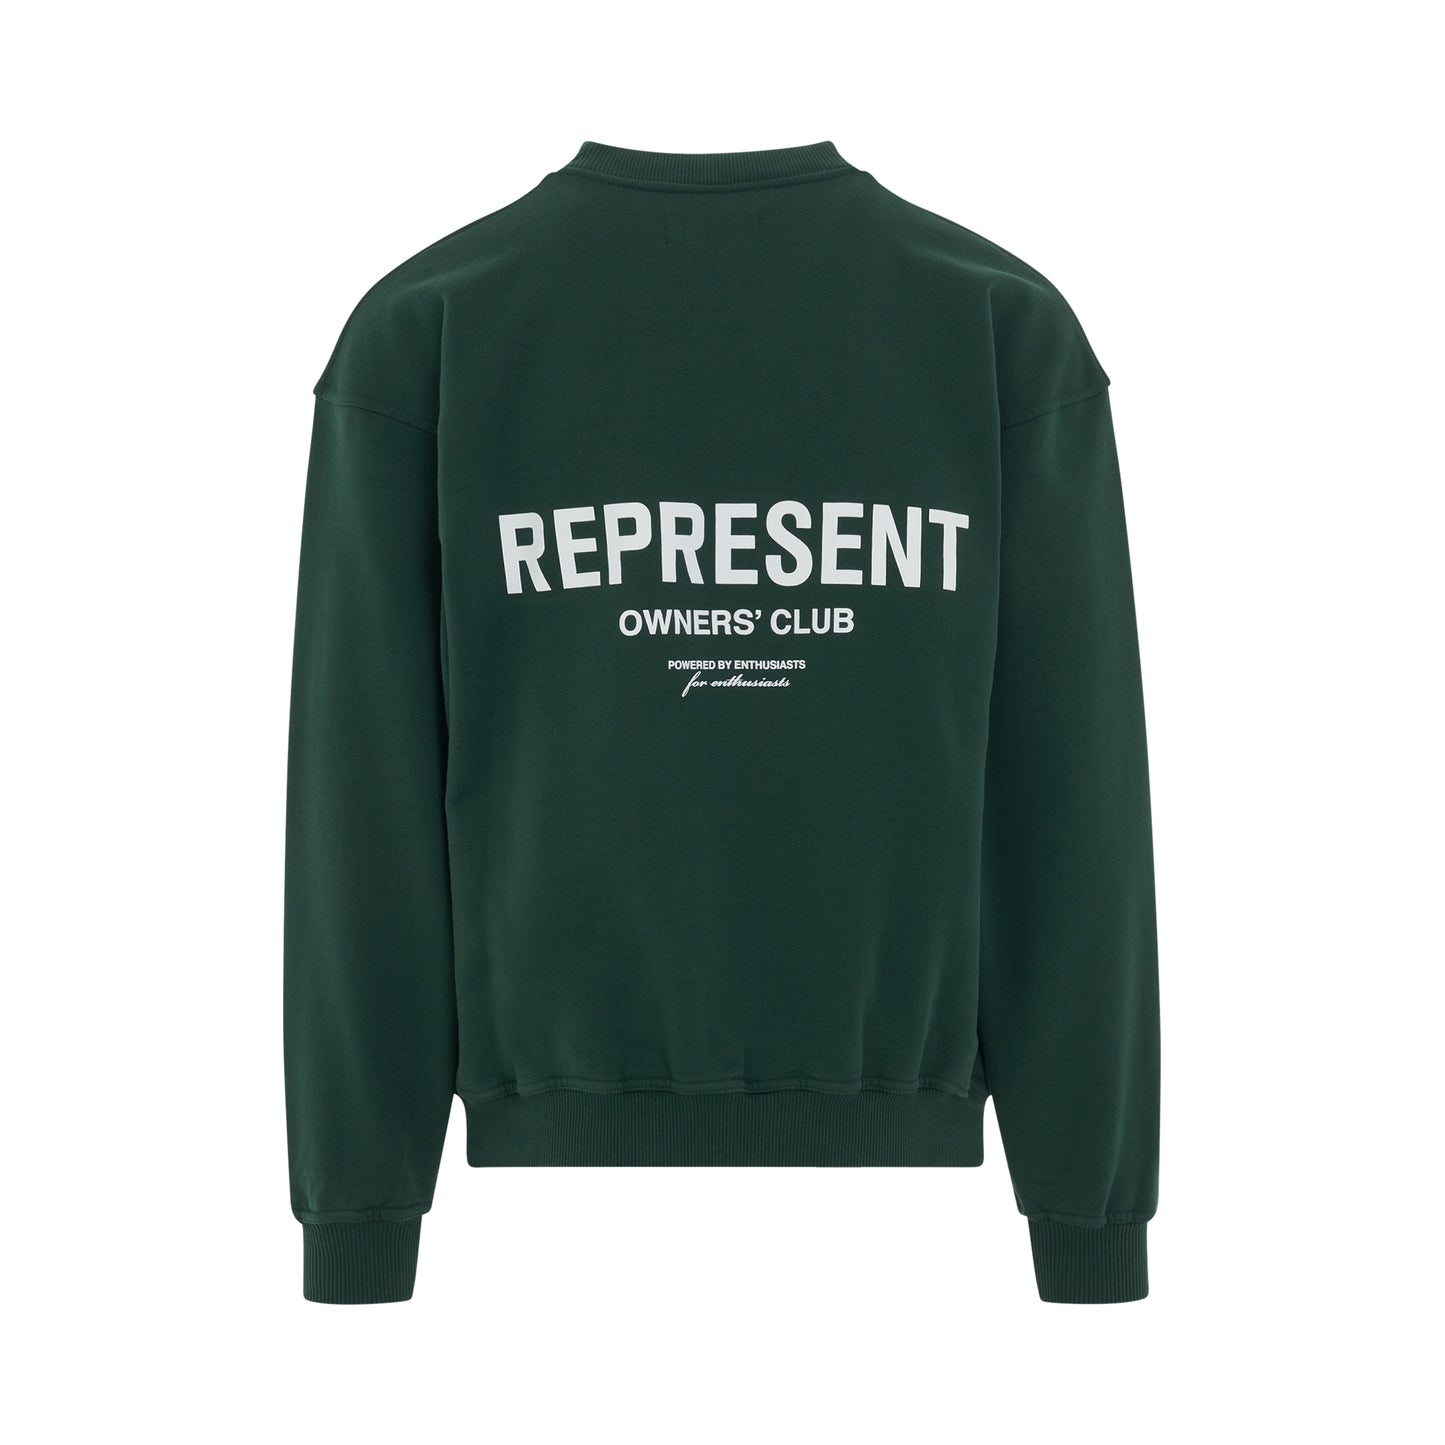 Represent Owners Club Sweater in Racing Green